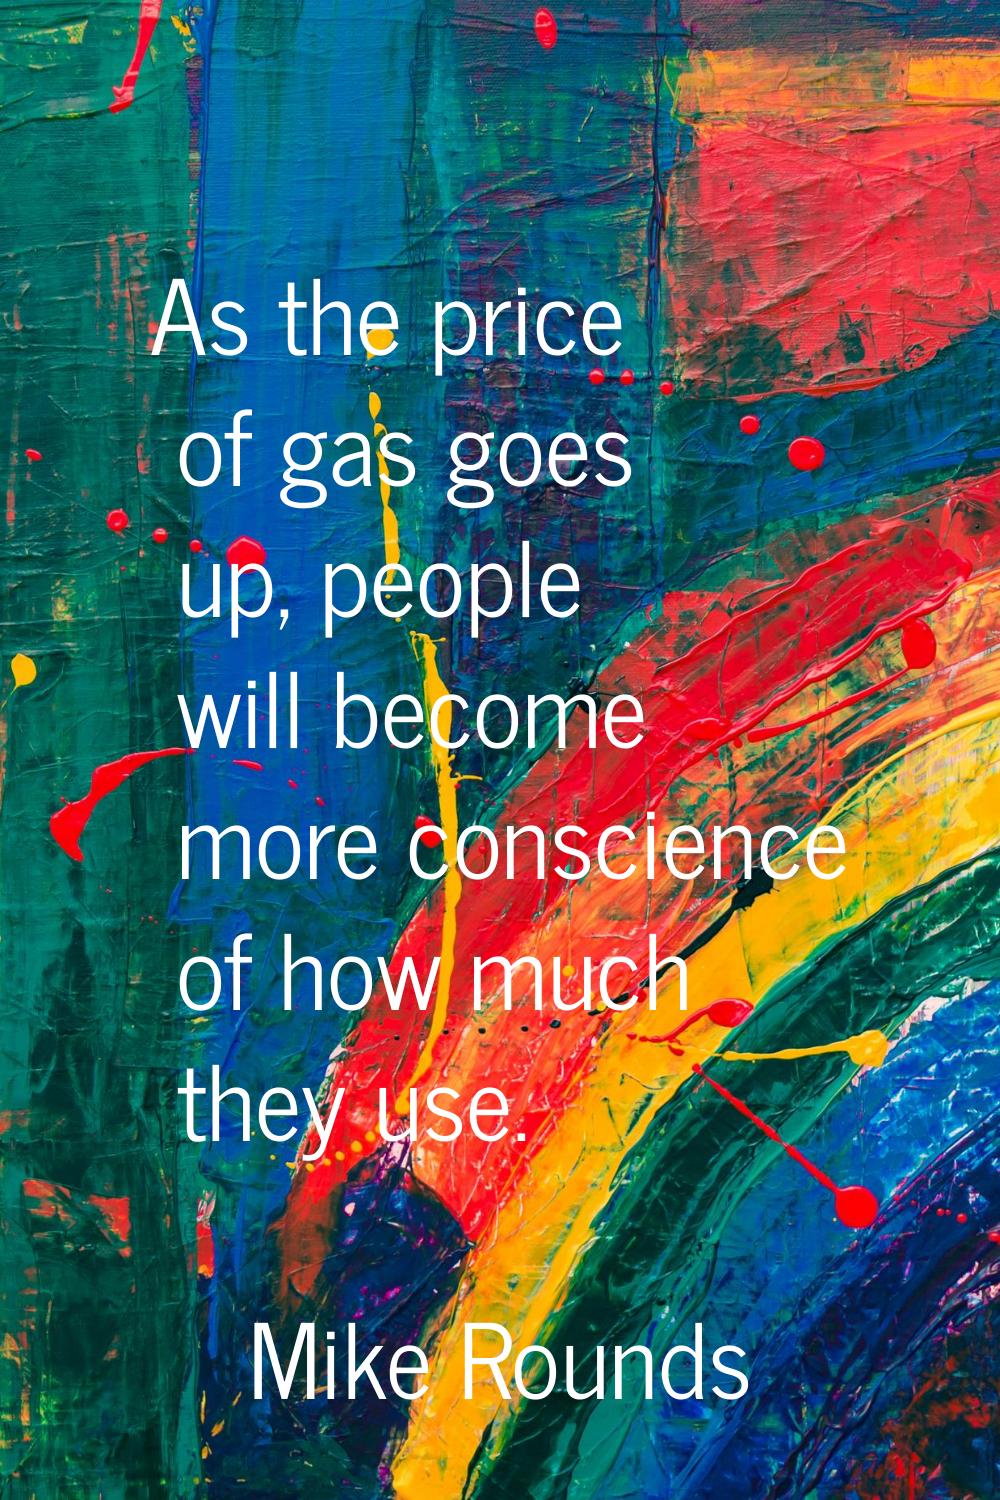 As the price of gas goes up, people will become more conscience of how much they use.